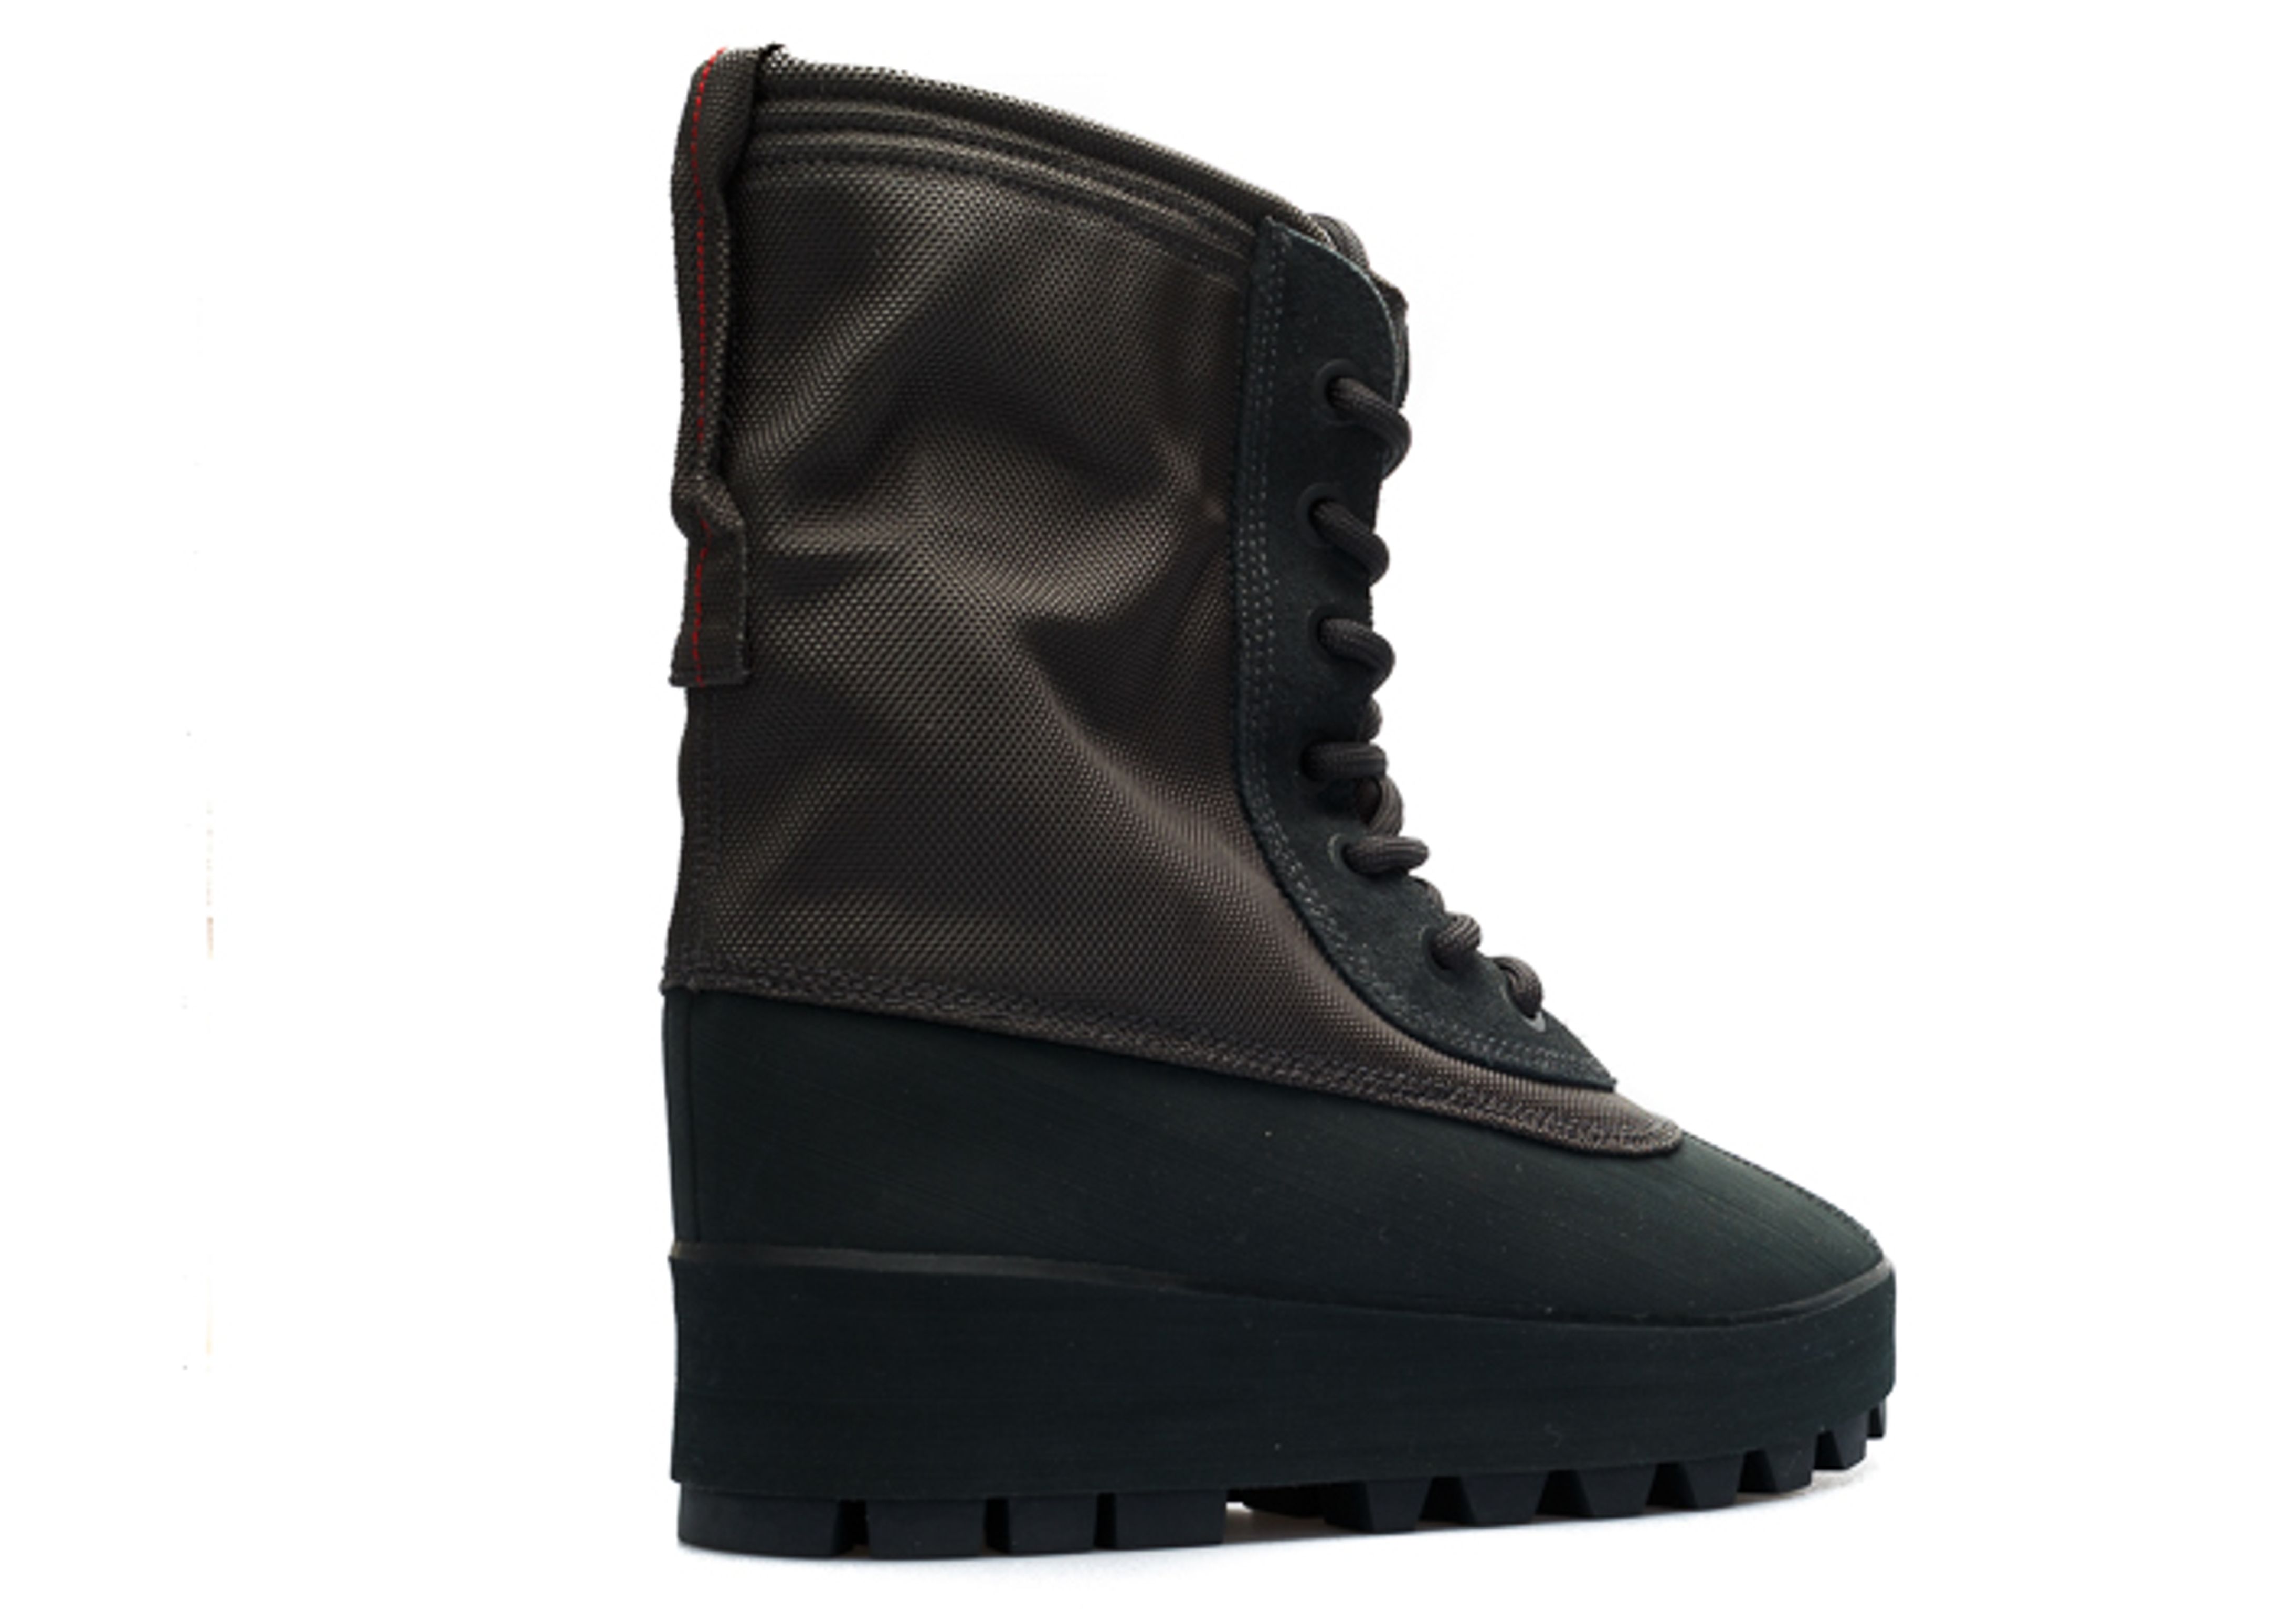 yeezy 950 boots for sale